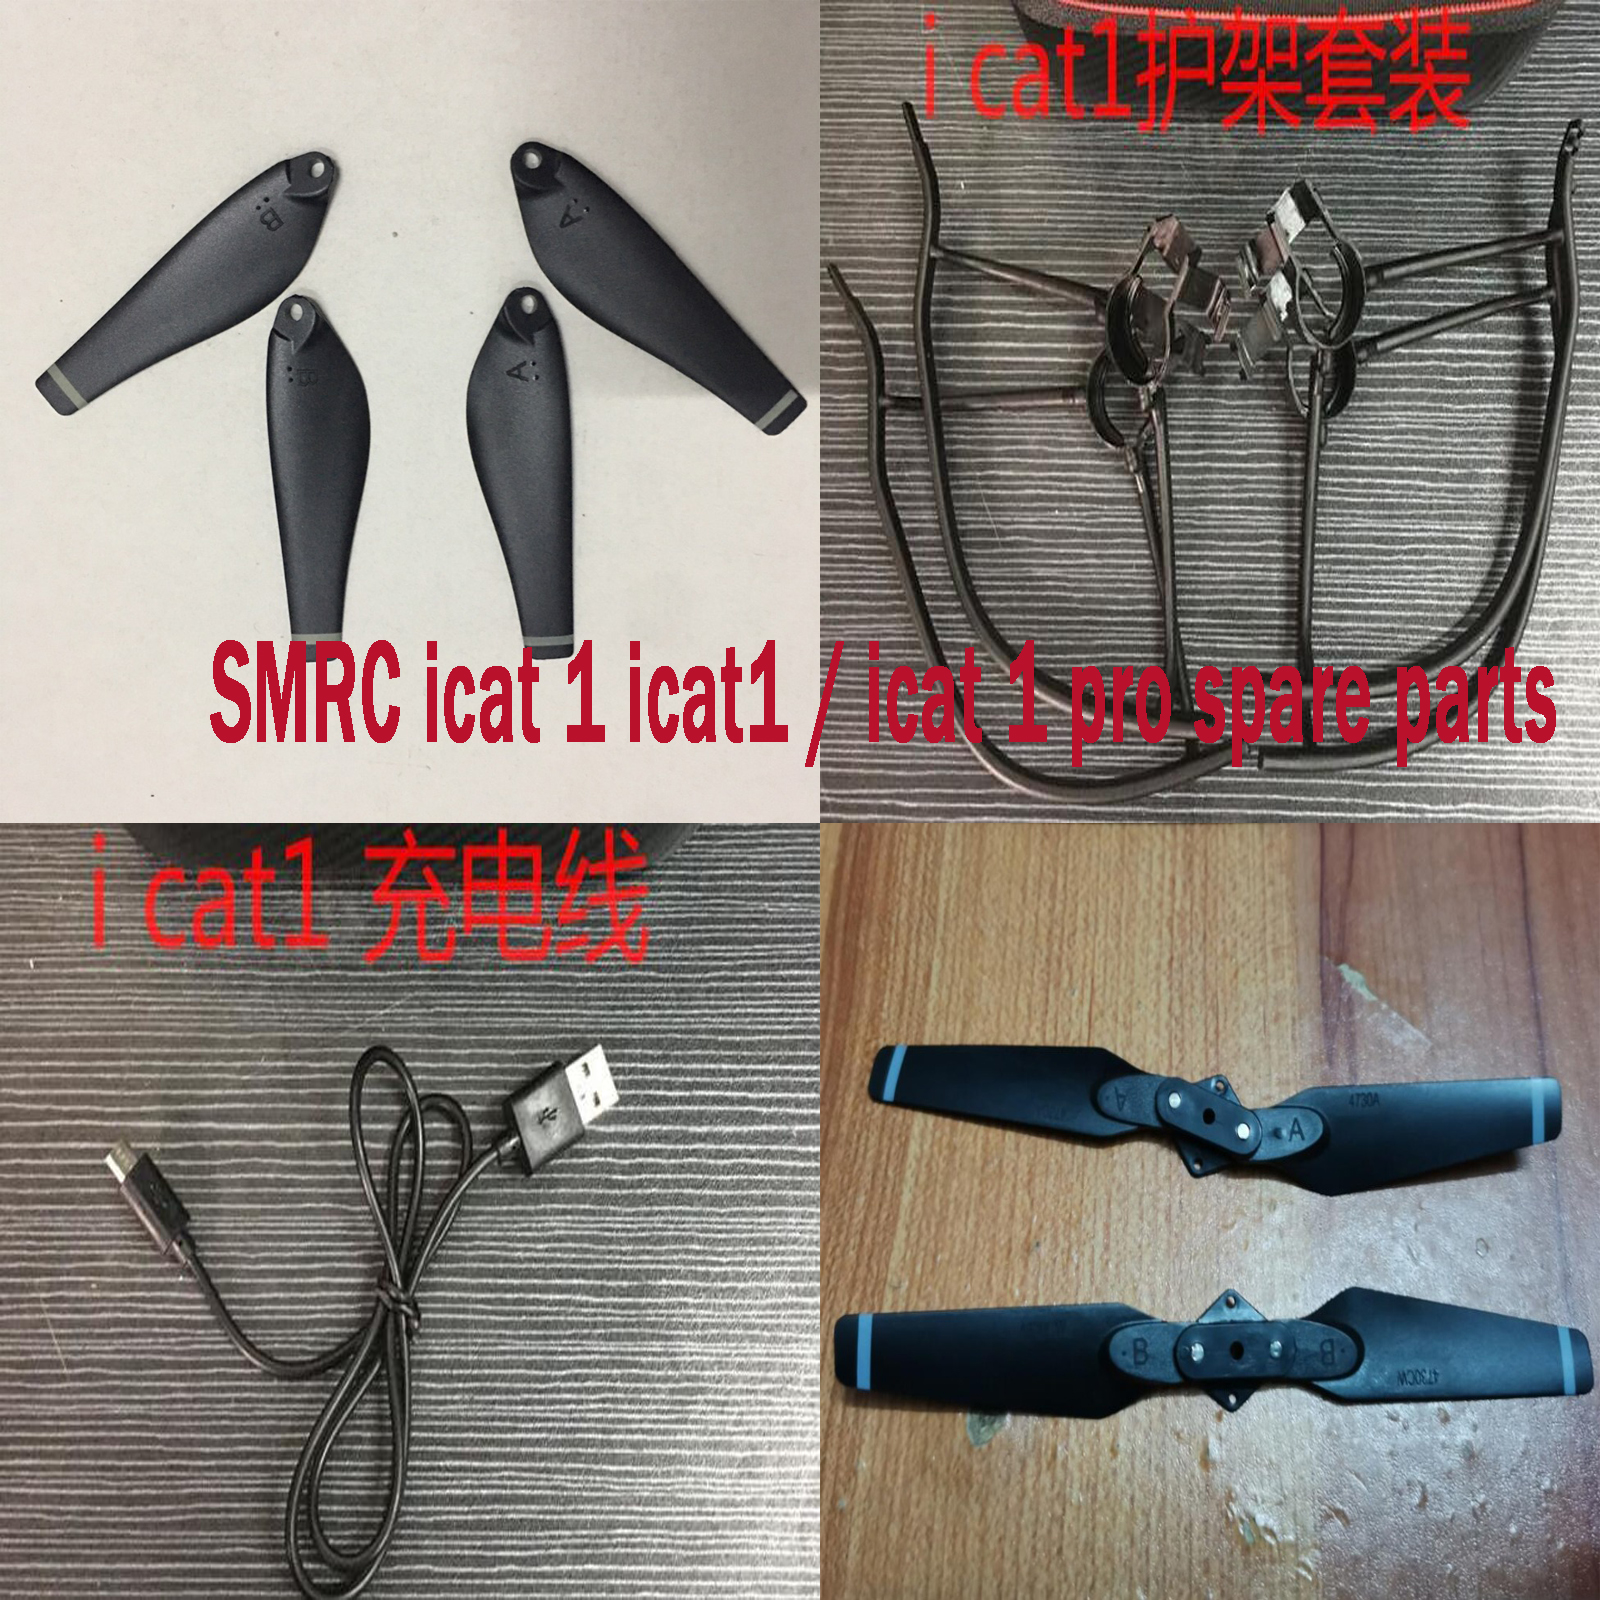 SMRC icat 1 icat1 / icat 1 pro icat1 pro RC Quadcopter Drone Spare Parts Accessory Blade Protection frame Charging Cable etc.